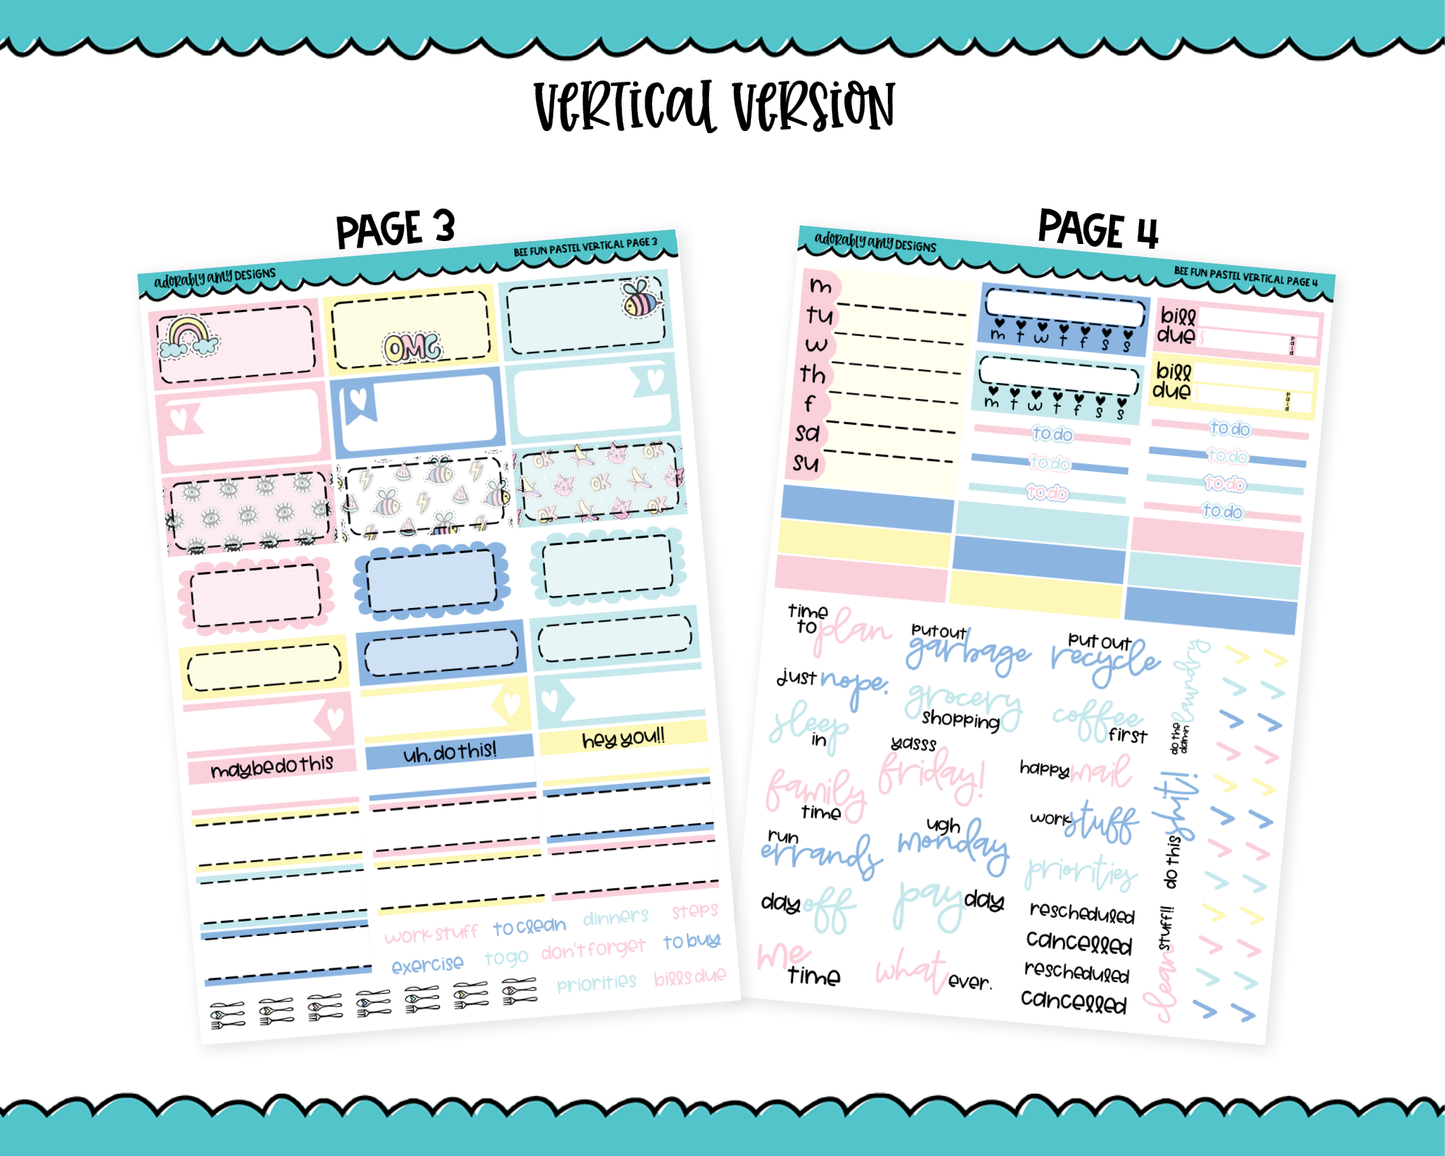 Vertical Bee Fun Pastel Planner Sticker Kit for Vertical Standard Size Planners or Inserts